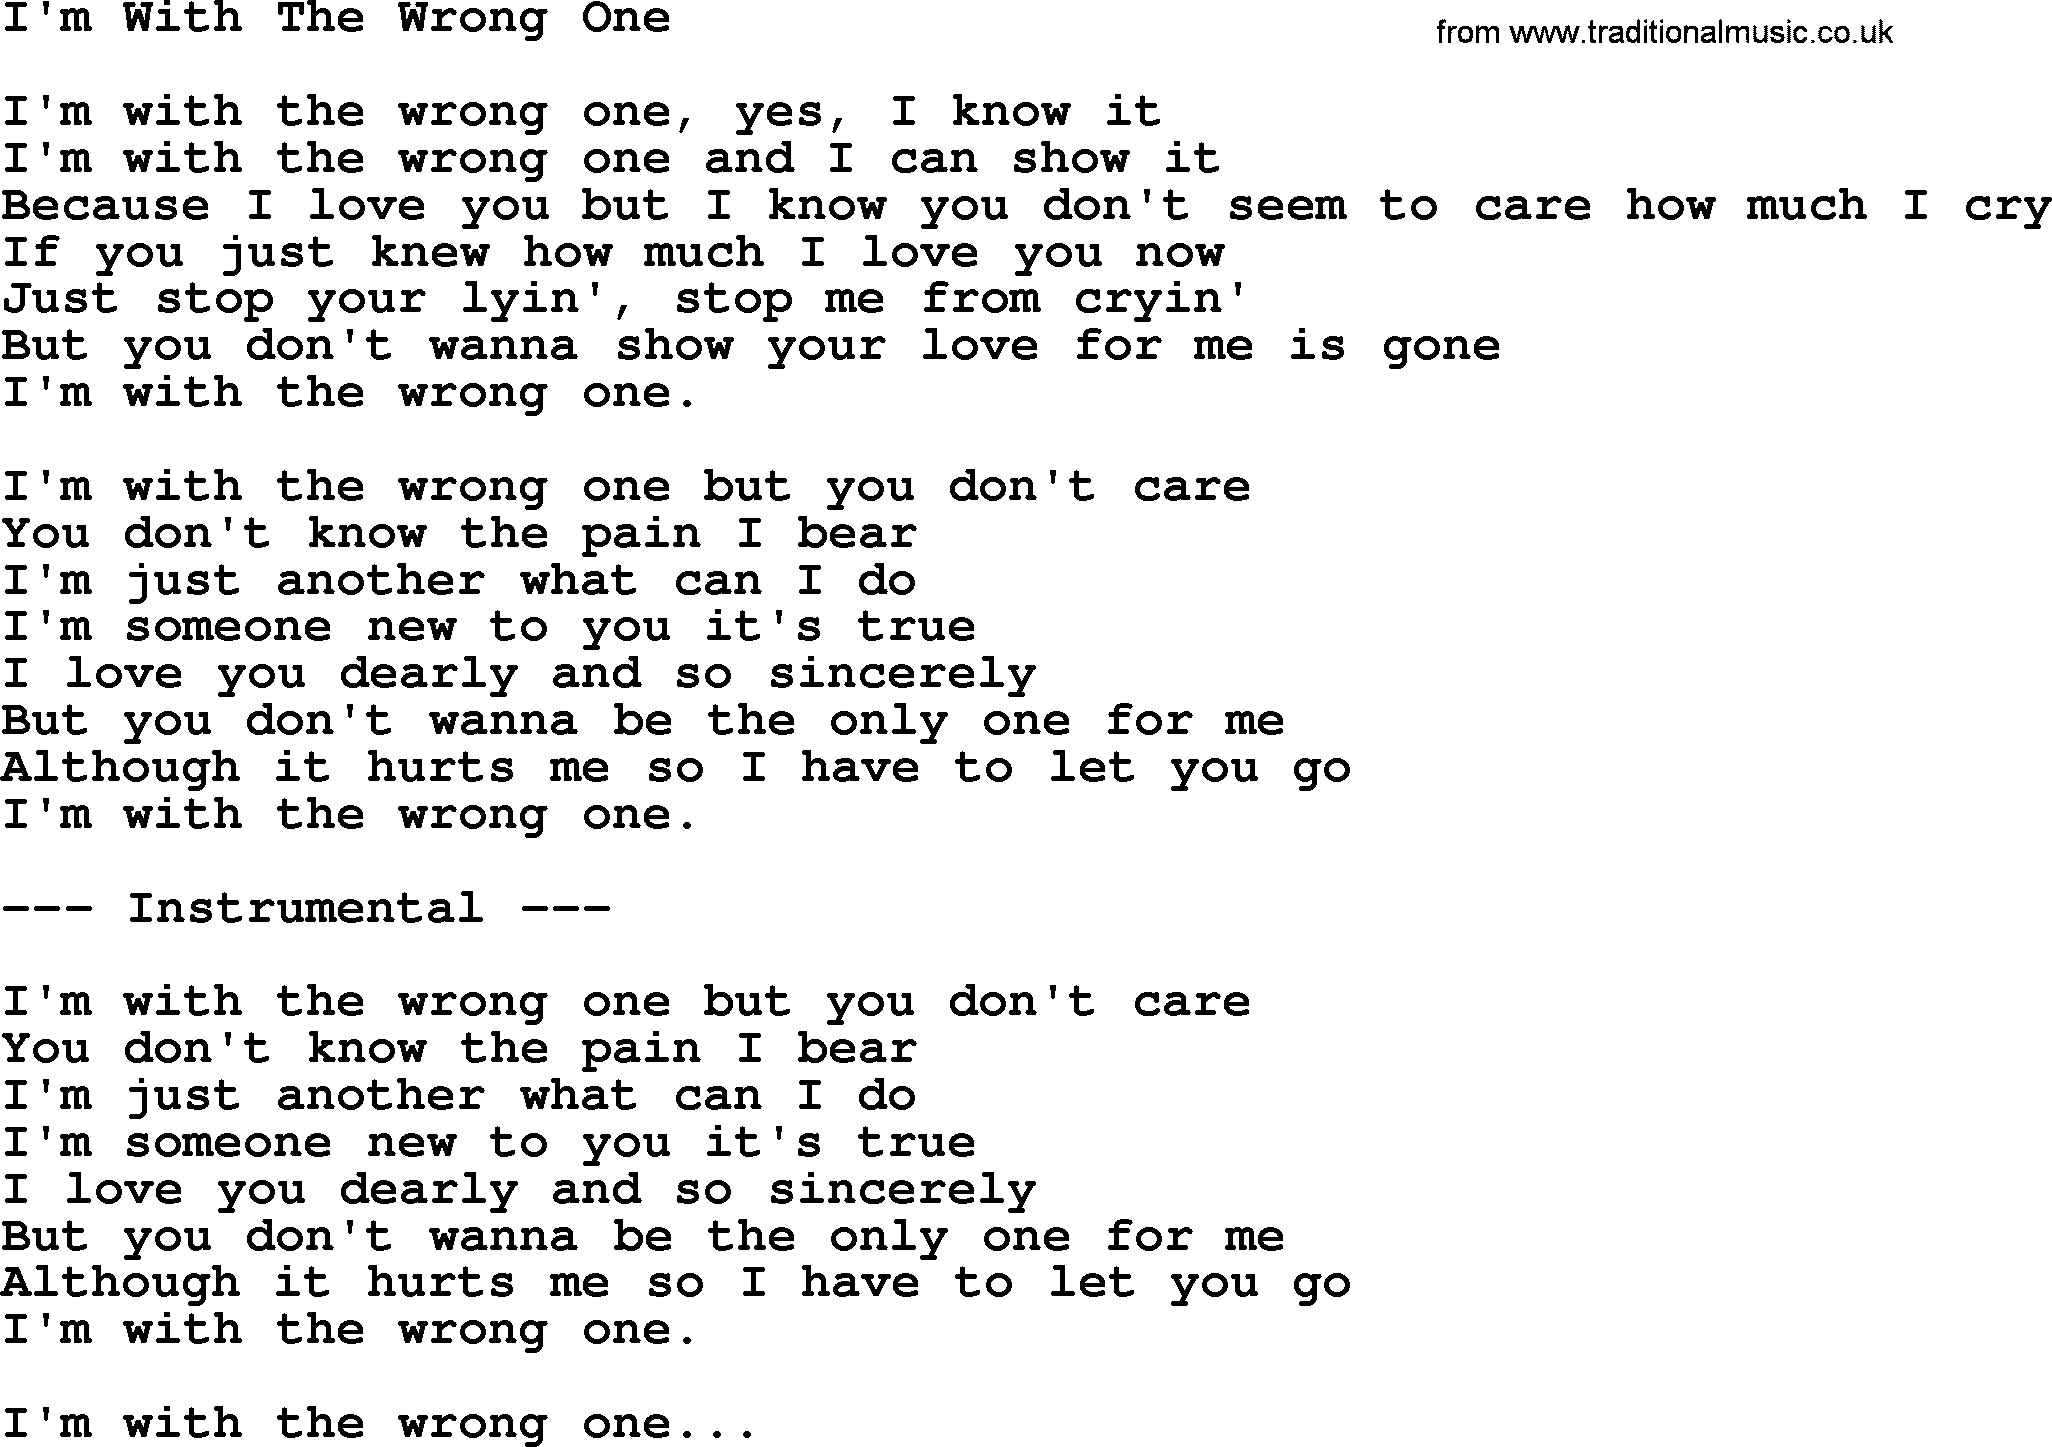 George Jones song: I'm With The Wrong One, lyrics